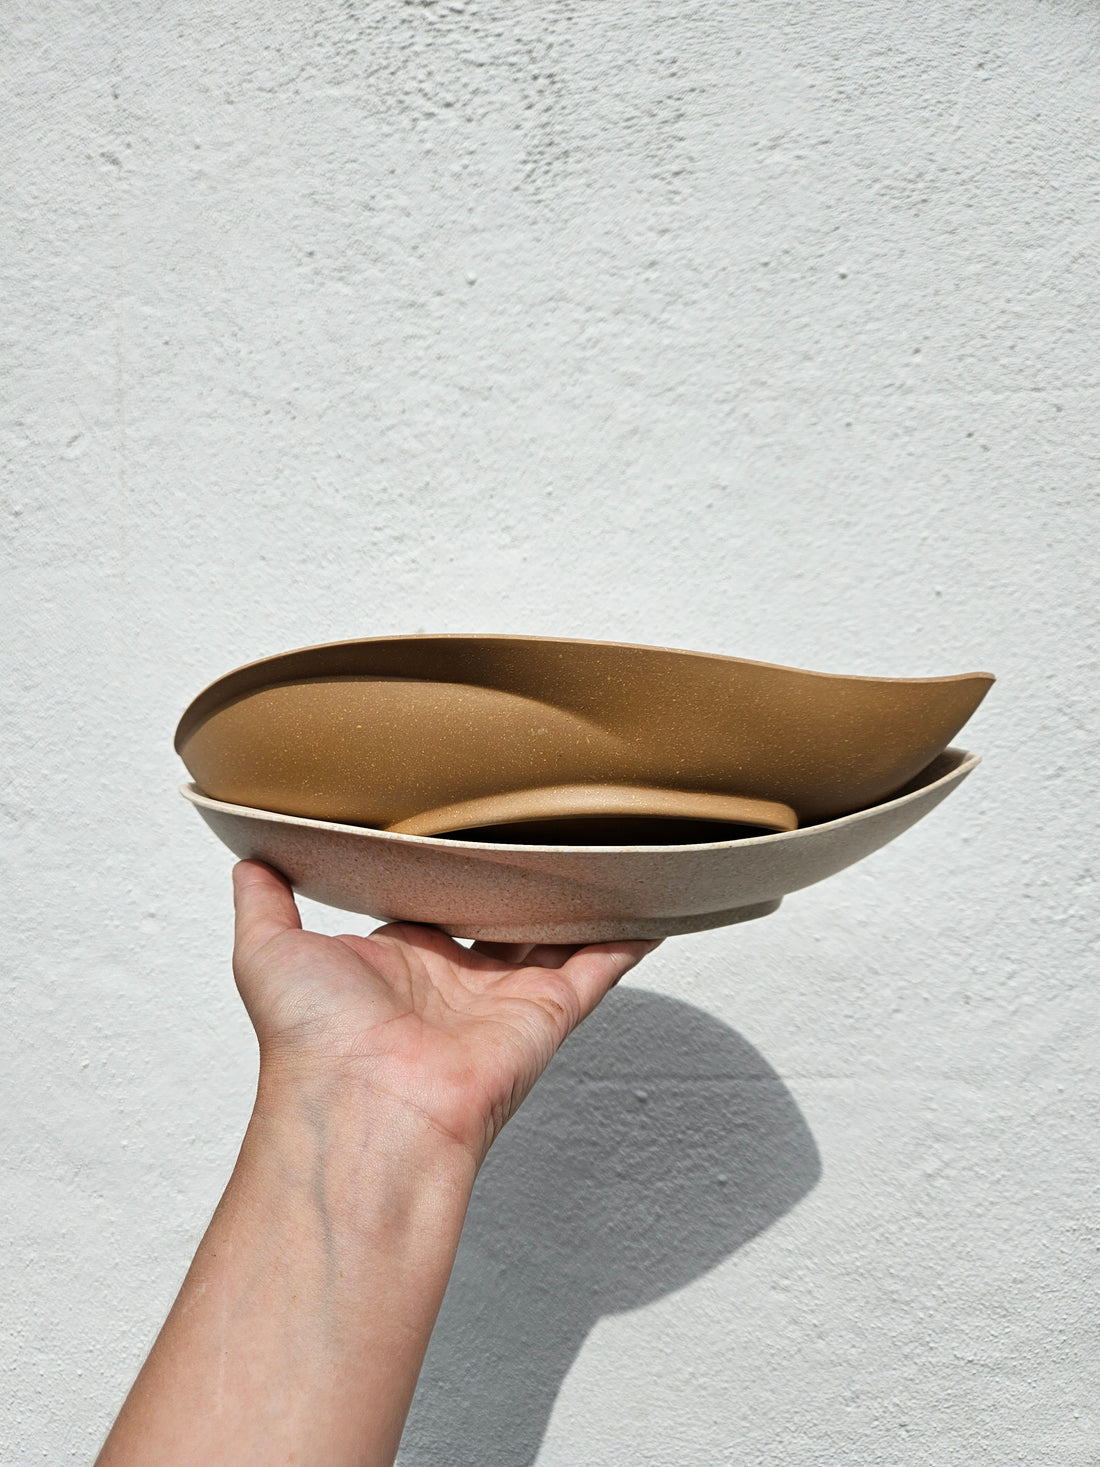 Husk curved (Seed pod) planter bowl- 2 colours available